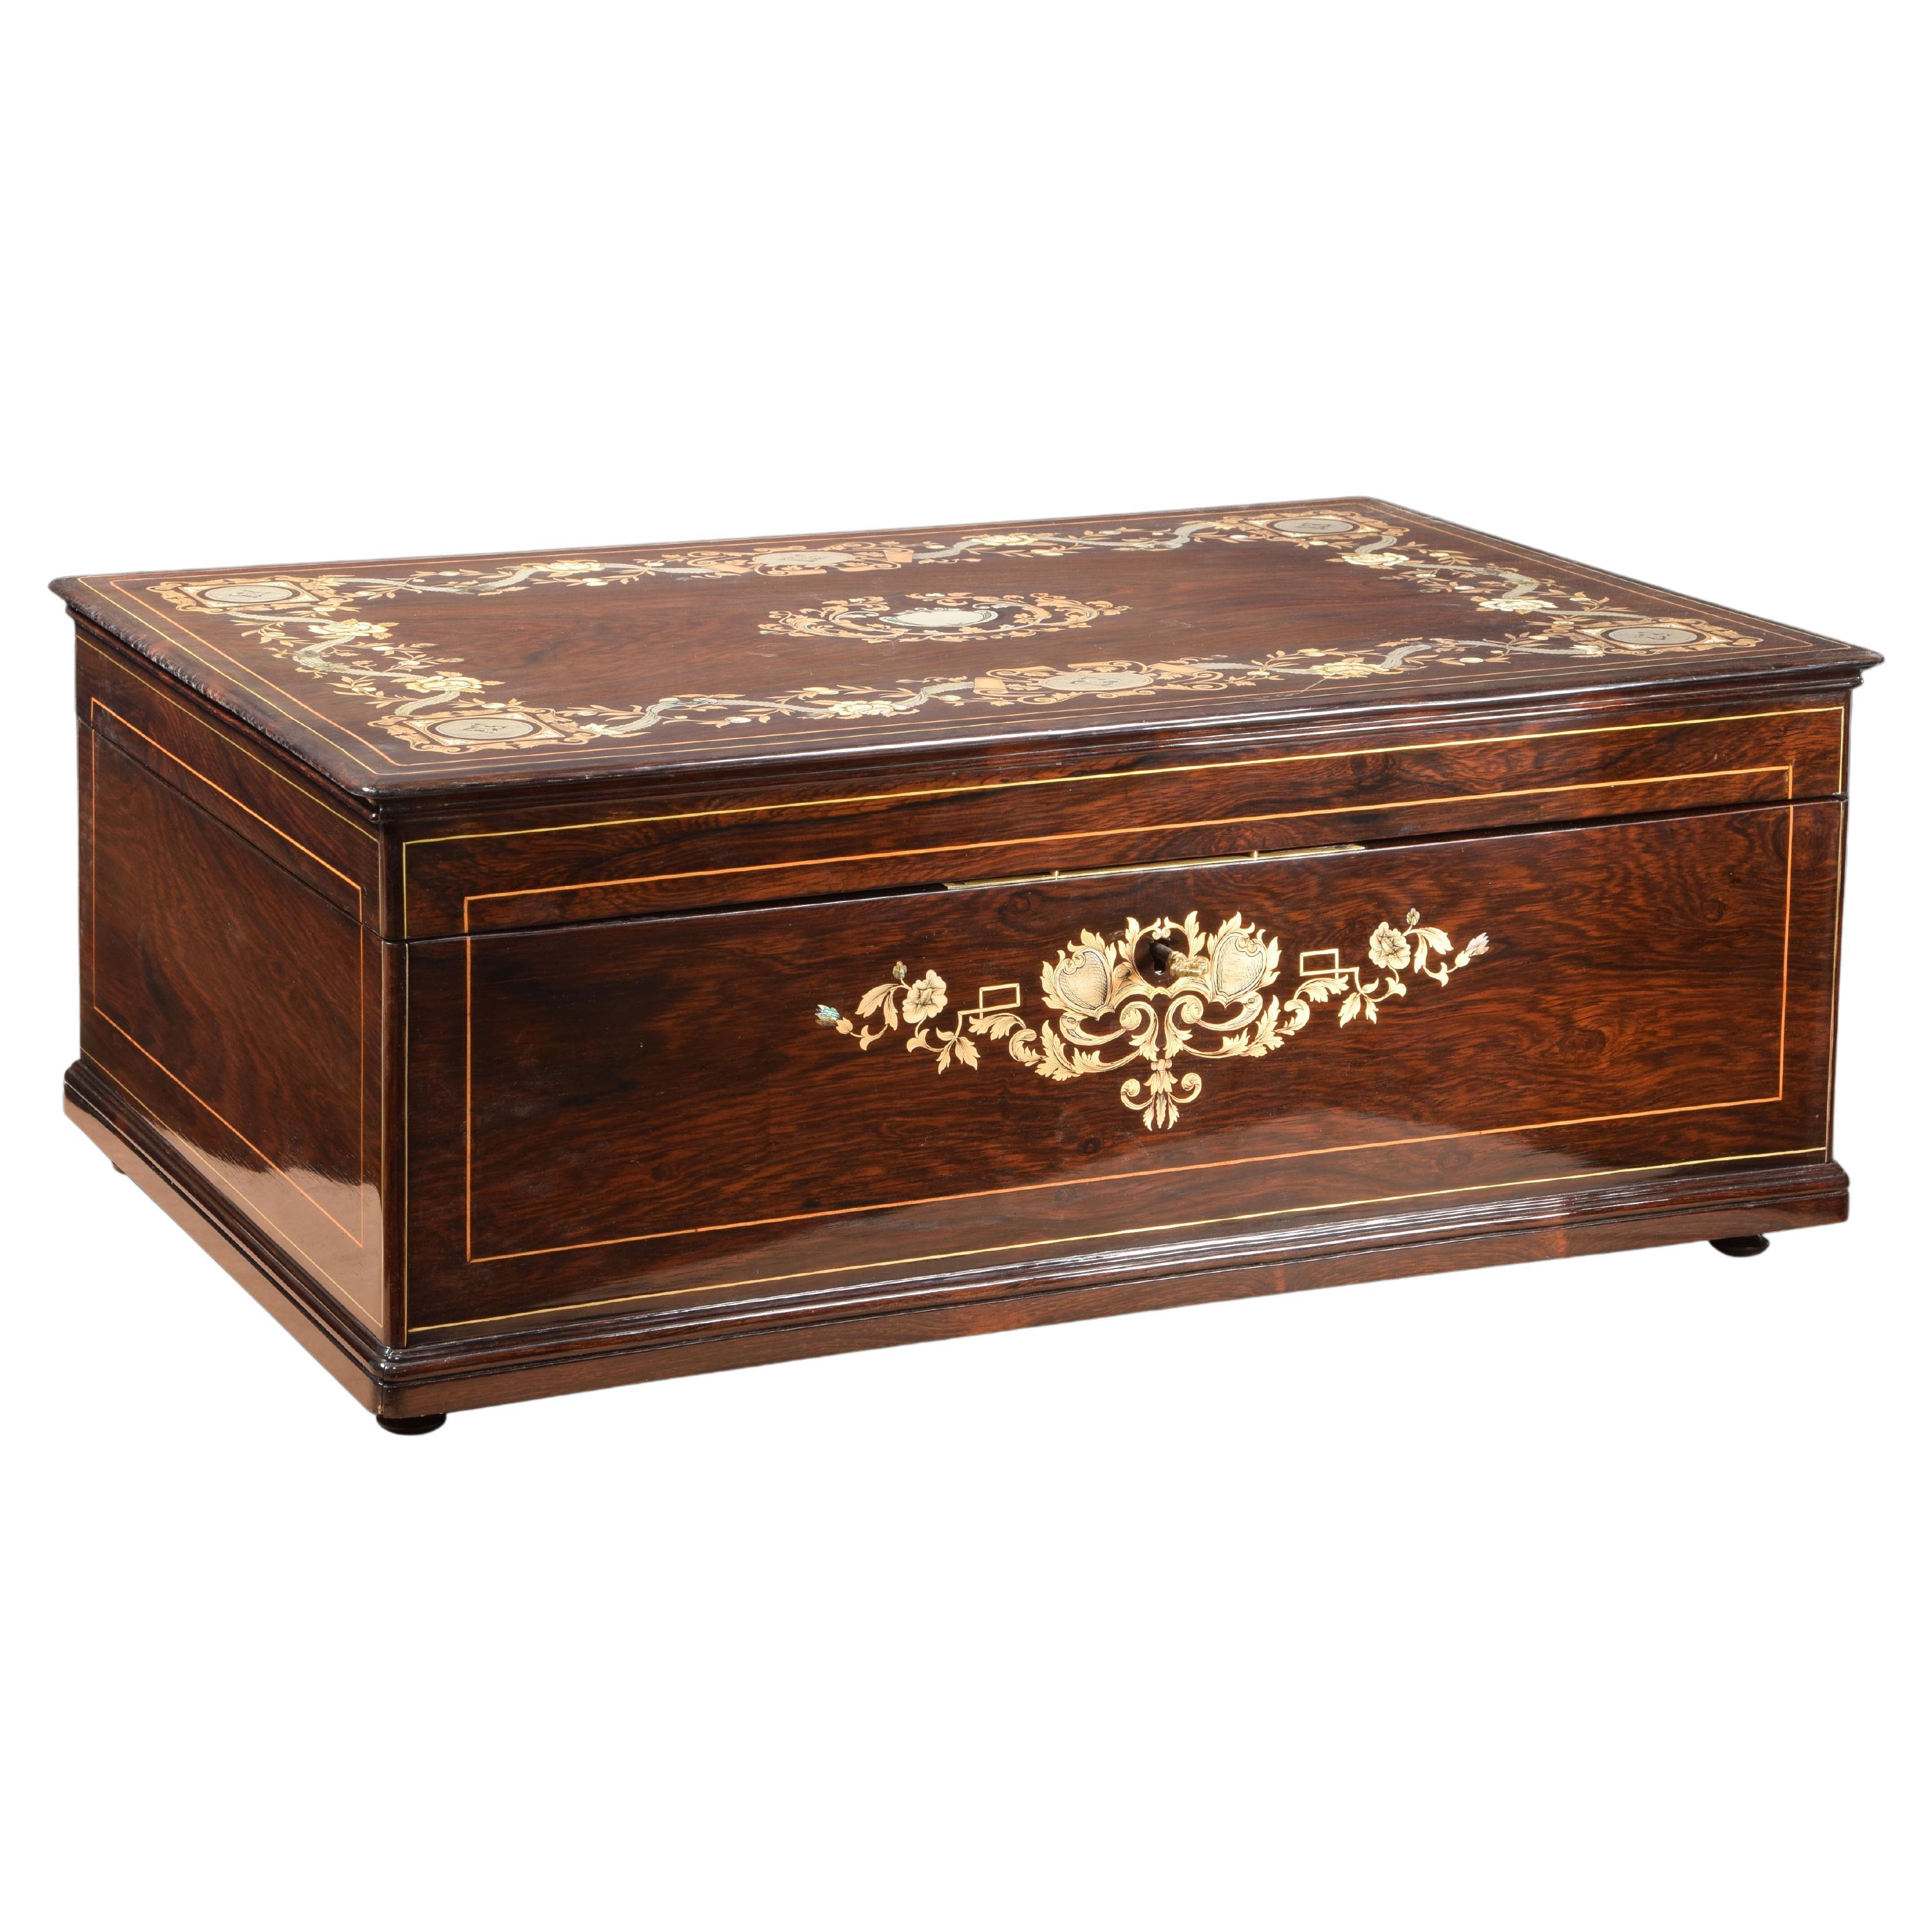 Napoleon III Writing Slope or Box, Marquetry, France, 19th Century